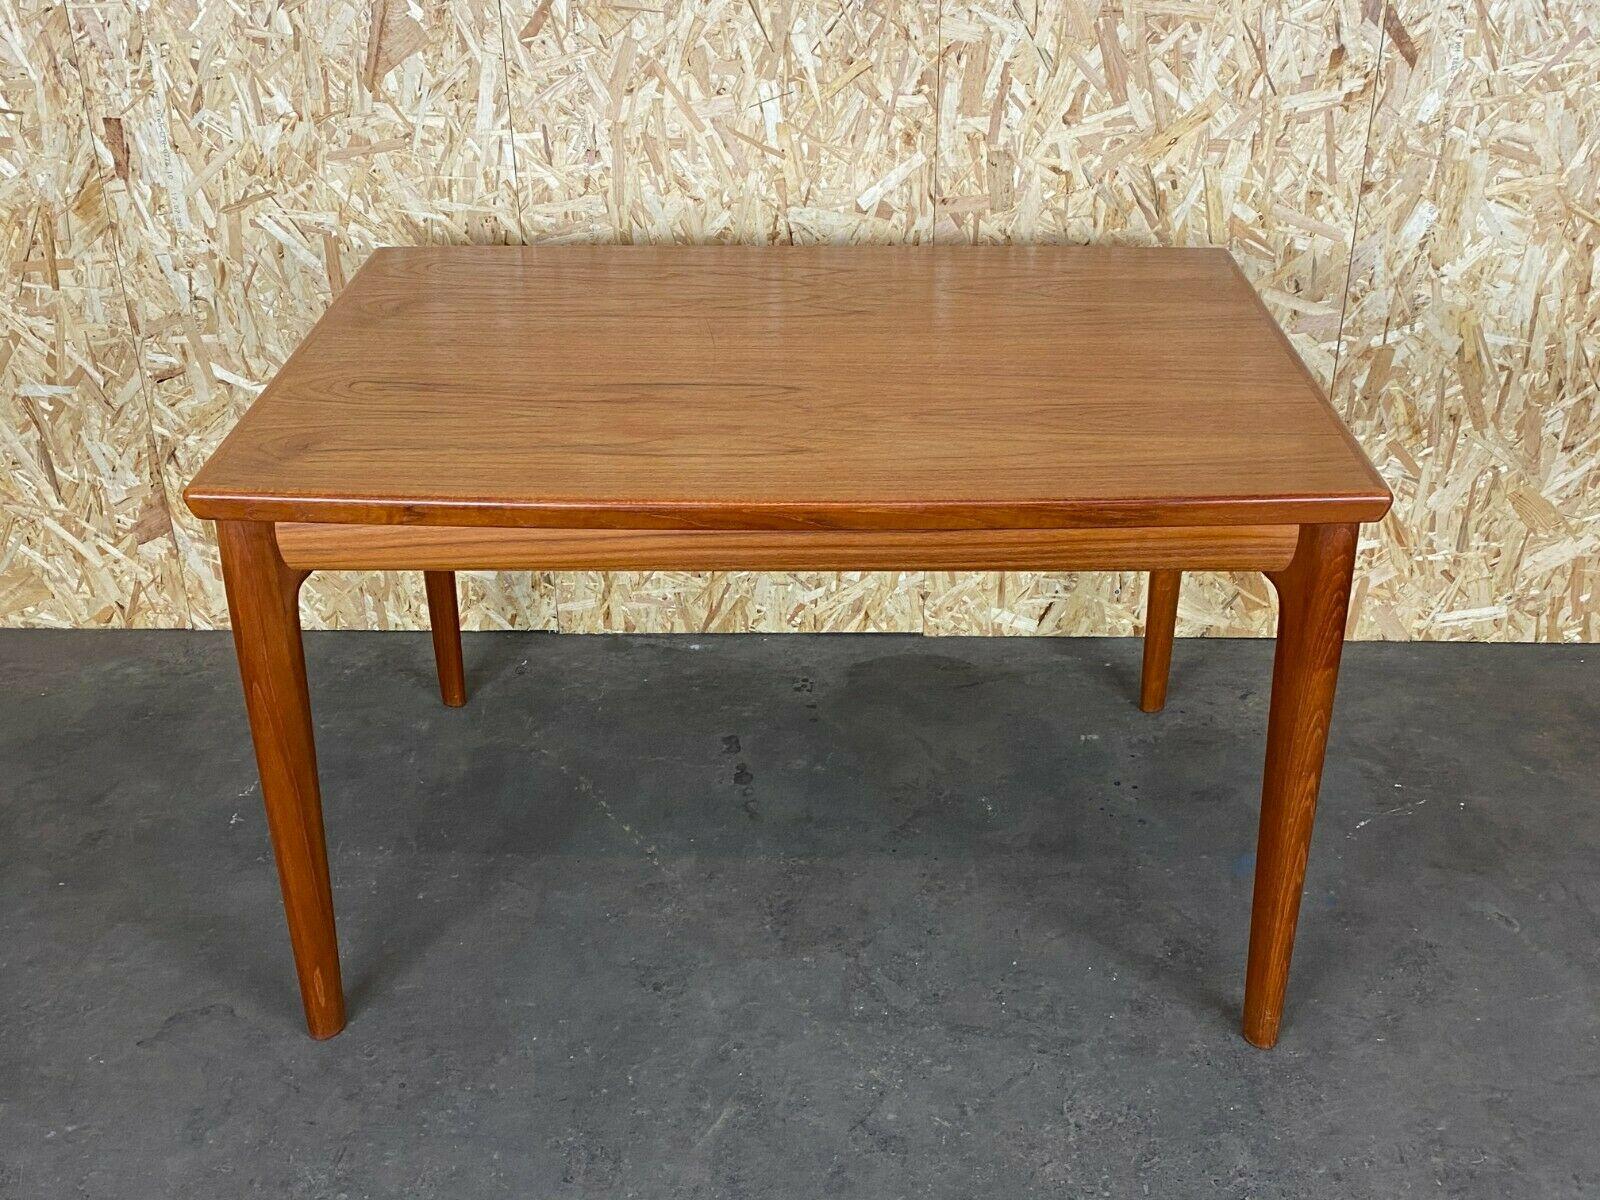 60s 70s Teak dining table Danish Grete Jalk for Glostrup Design

Object: dining table / dining table

Manufacturer: Glostrup

Condition: good

Age: around 1960-1970

Dimensions:

(+ 2x 47cm) 120cm x 86cm x 74cm

Other notes:

The